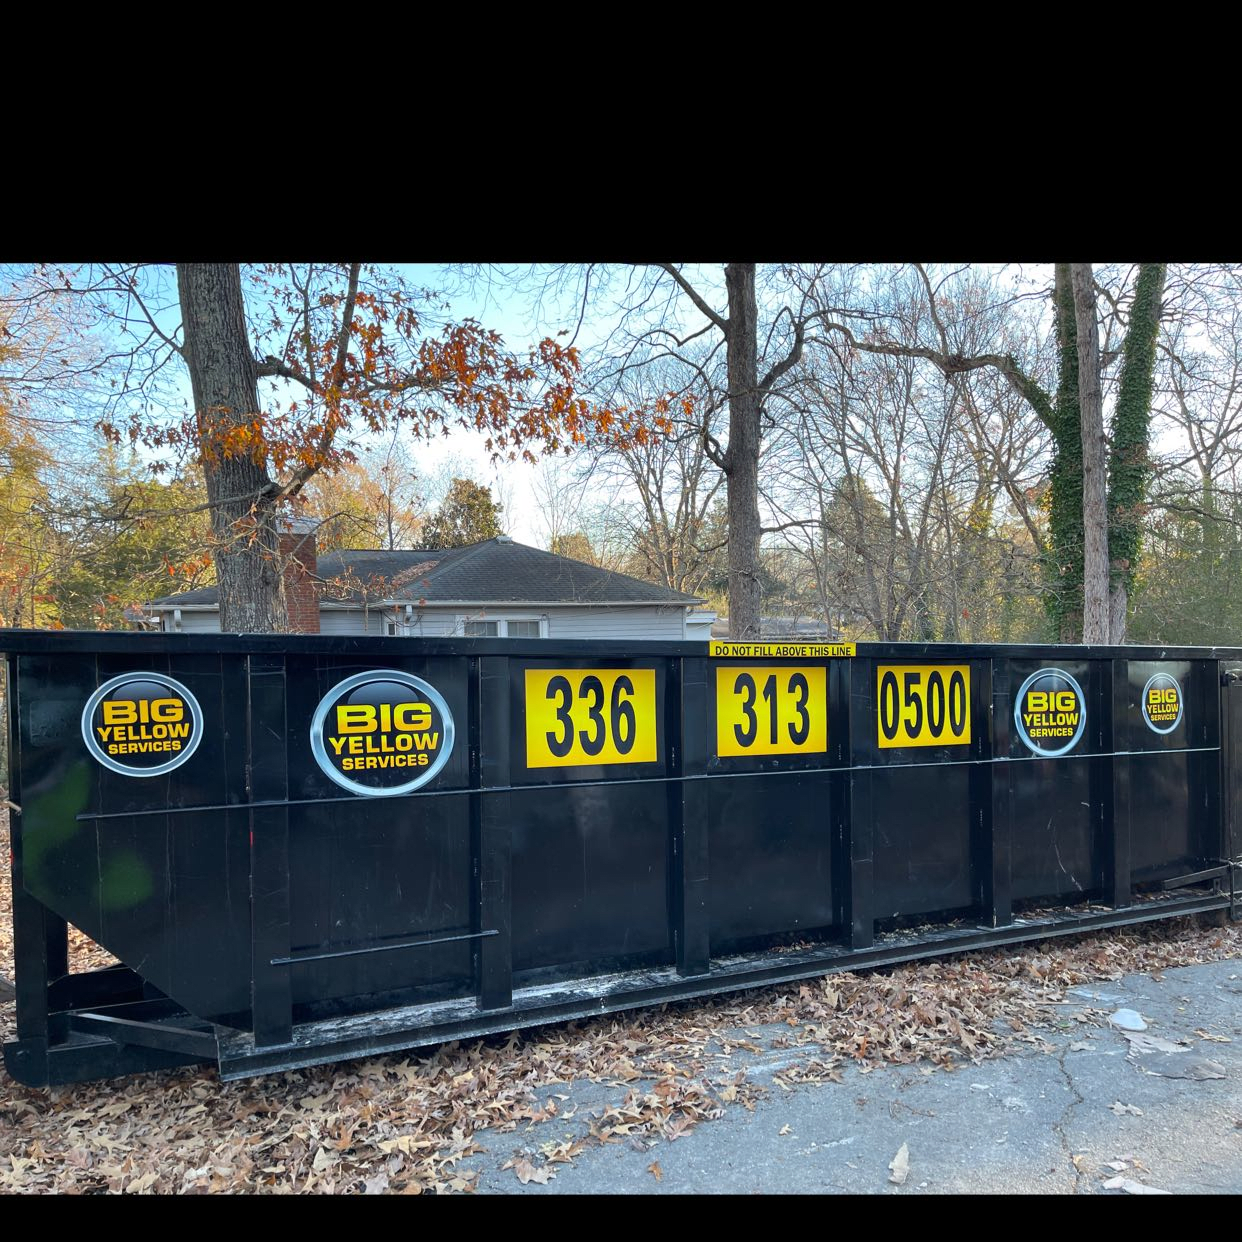 Asheboro, NC 27203 30yard dumpster rental services Privacy Policy